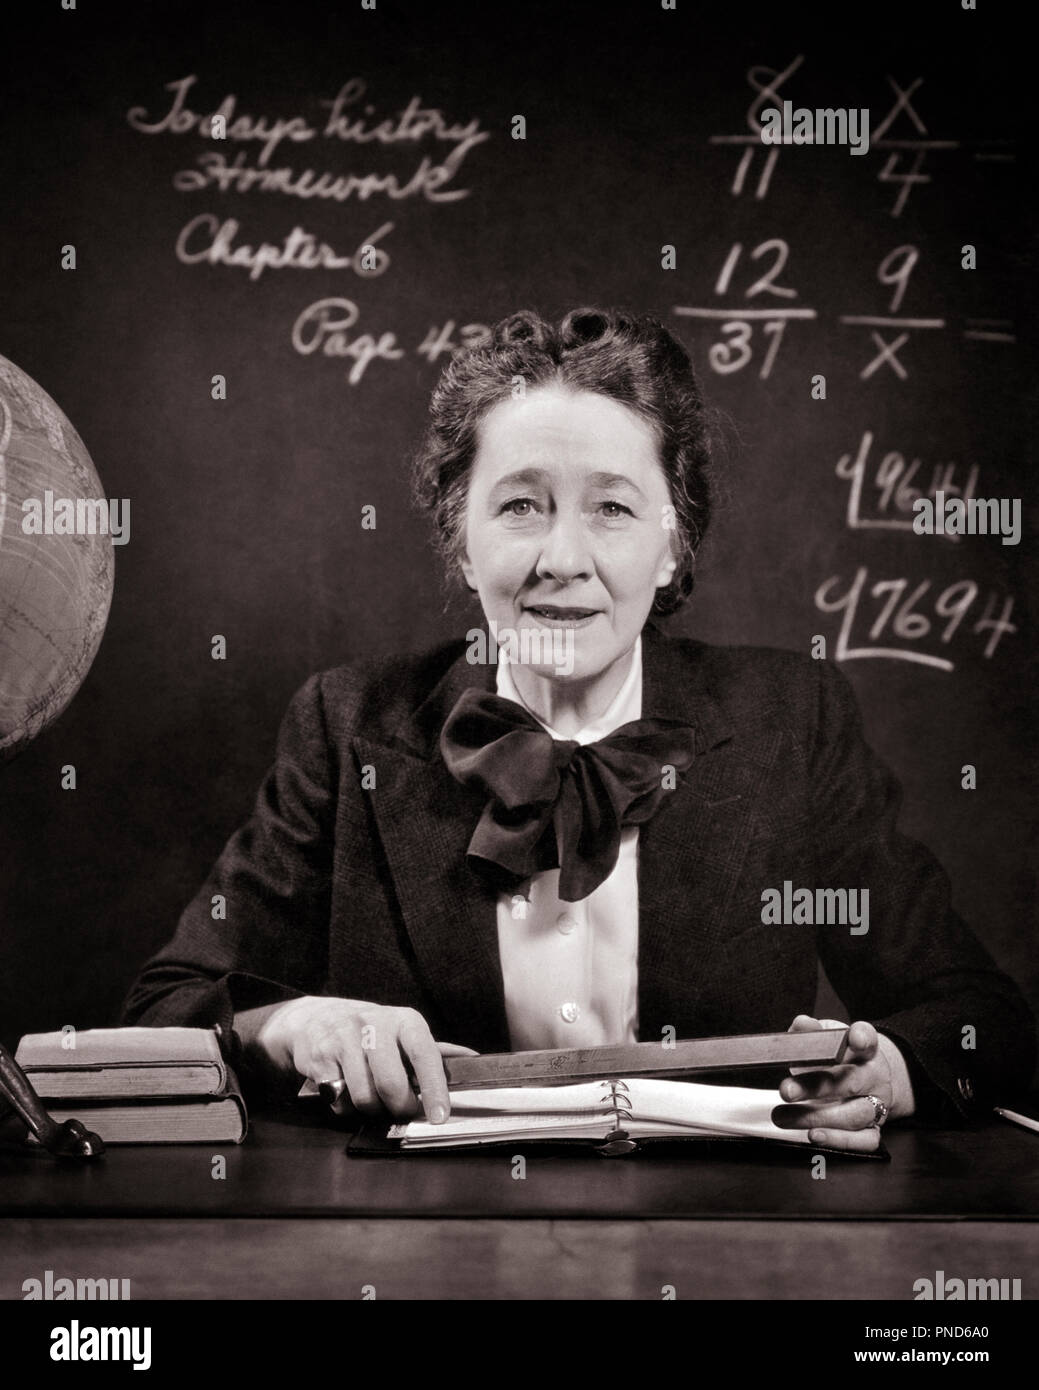 1940s-smiling-middle-aged-school-teacher-at-desk-beside-globe-holding-ruler-looking-at-camera-math-on-blackboard-s11689-har001-hars-females-ladies-persons-inspiration-caring-confidence-expressions-bw-mathematics-eye-contact-nice-head-and-shoulders-cheerful-strength-ruler-knowledge-powerful-stern-pride-at-on-authority-occupations-smiles-strict-beside-joyful-old-maid-problems-stylish-middle-age-pleasant-mid-adult-mid-adult-woman-precision-prissy-black-and-white-caucasian-ethnicity-har001-old-fashioned-severe-PND6A0.jpg